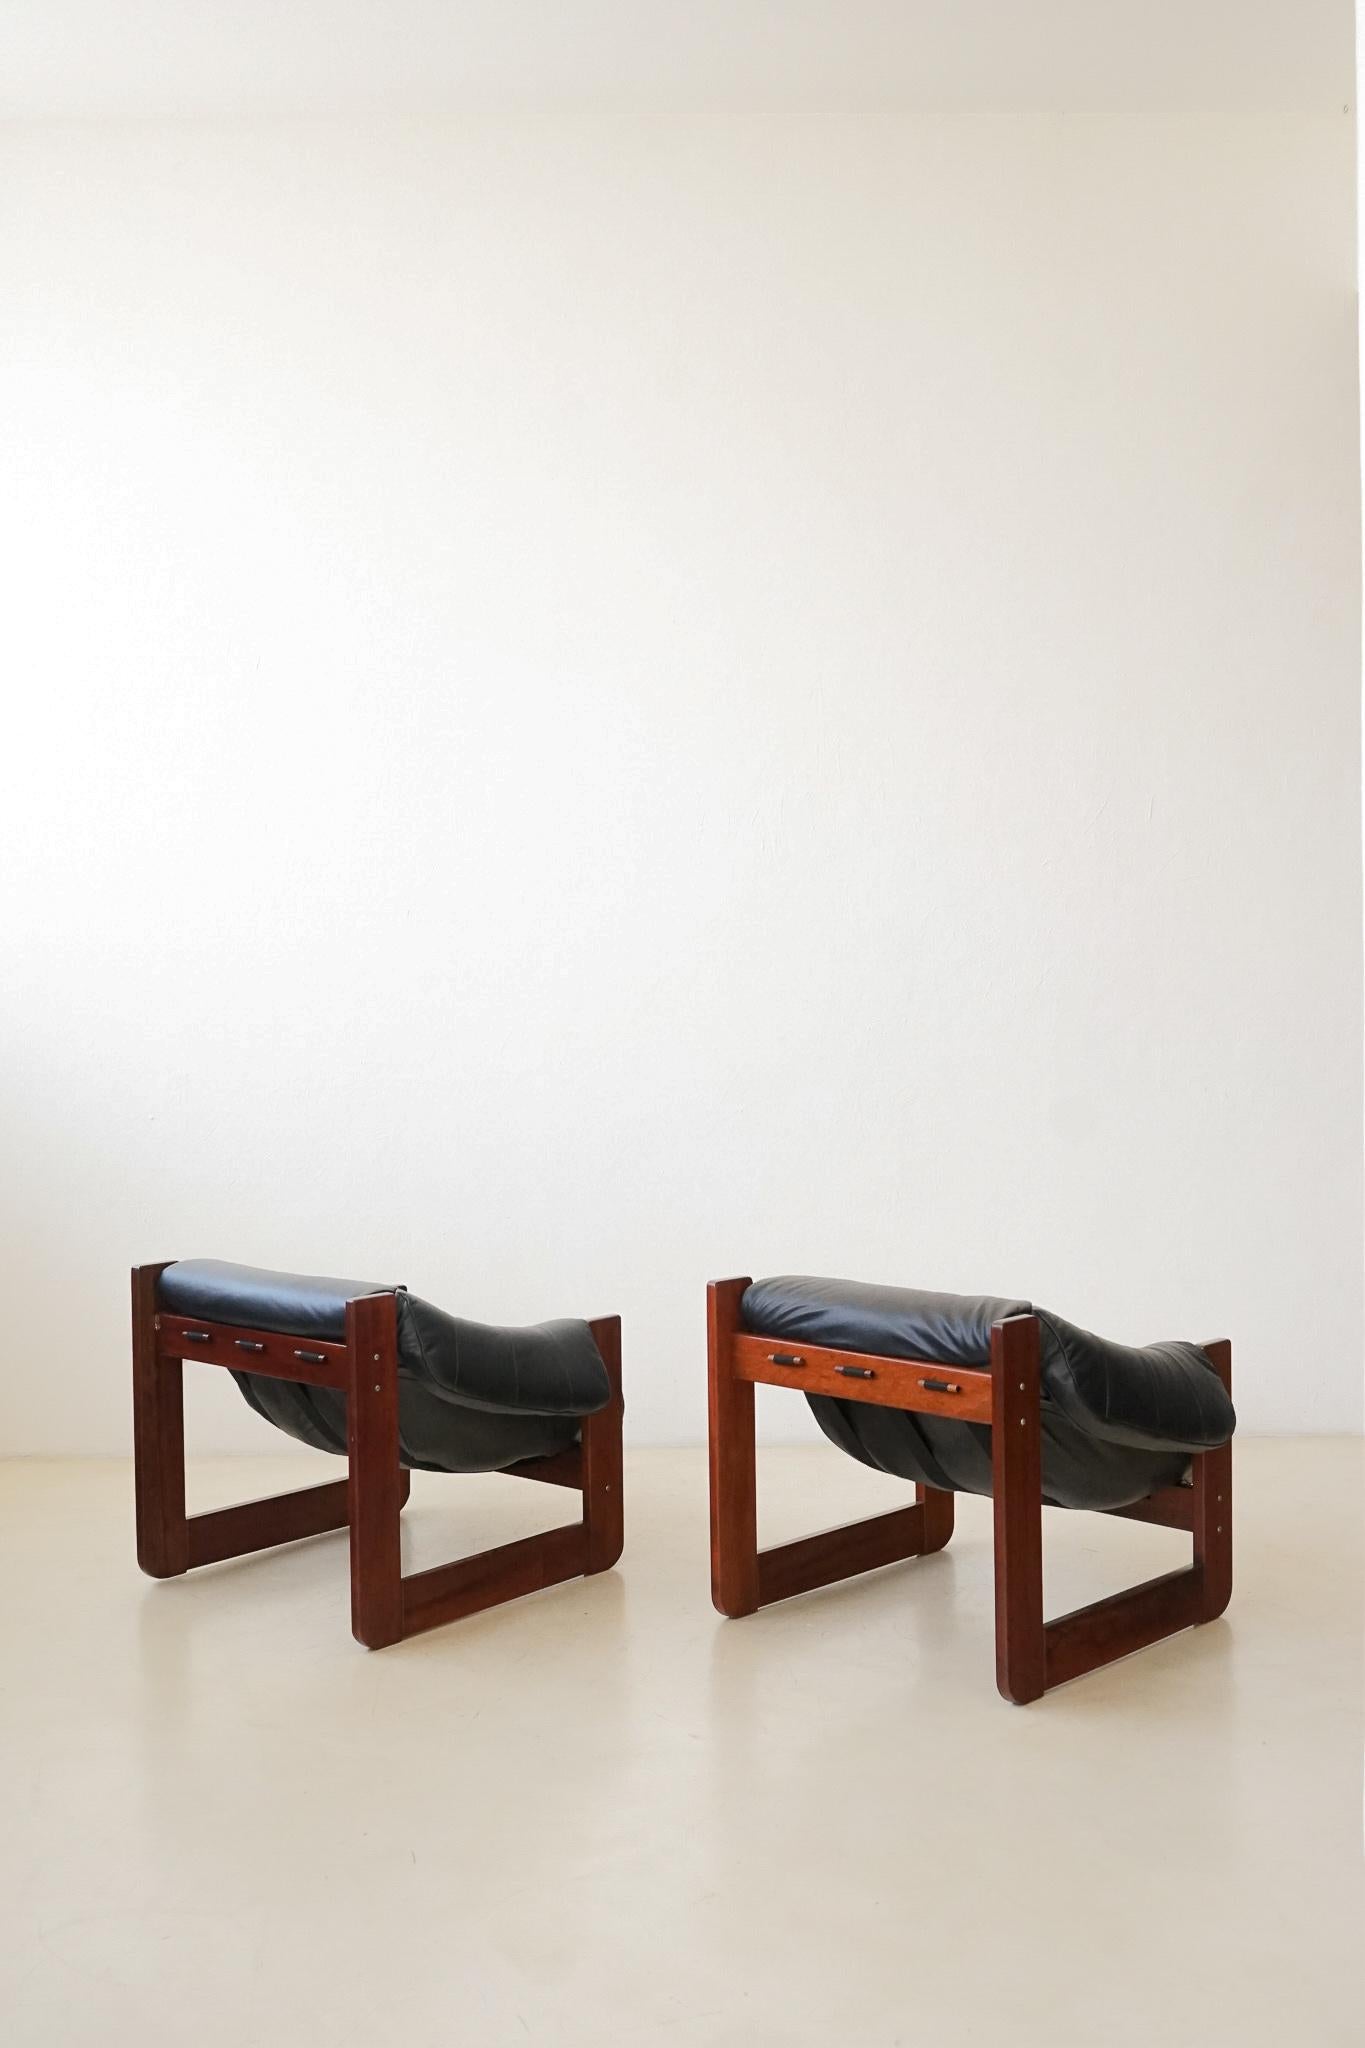 In his designs, Percival Lafer sought ergonomy and comfort. This pair of MP-97 lounge chairs by Percival Lafer comprises a solid wood structure with a single piece of a loose foam seat. Its unique design and construction make this an authentic